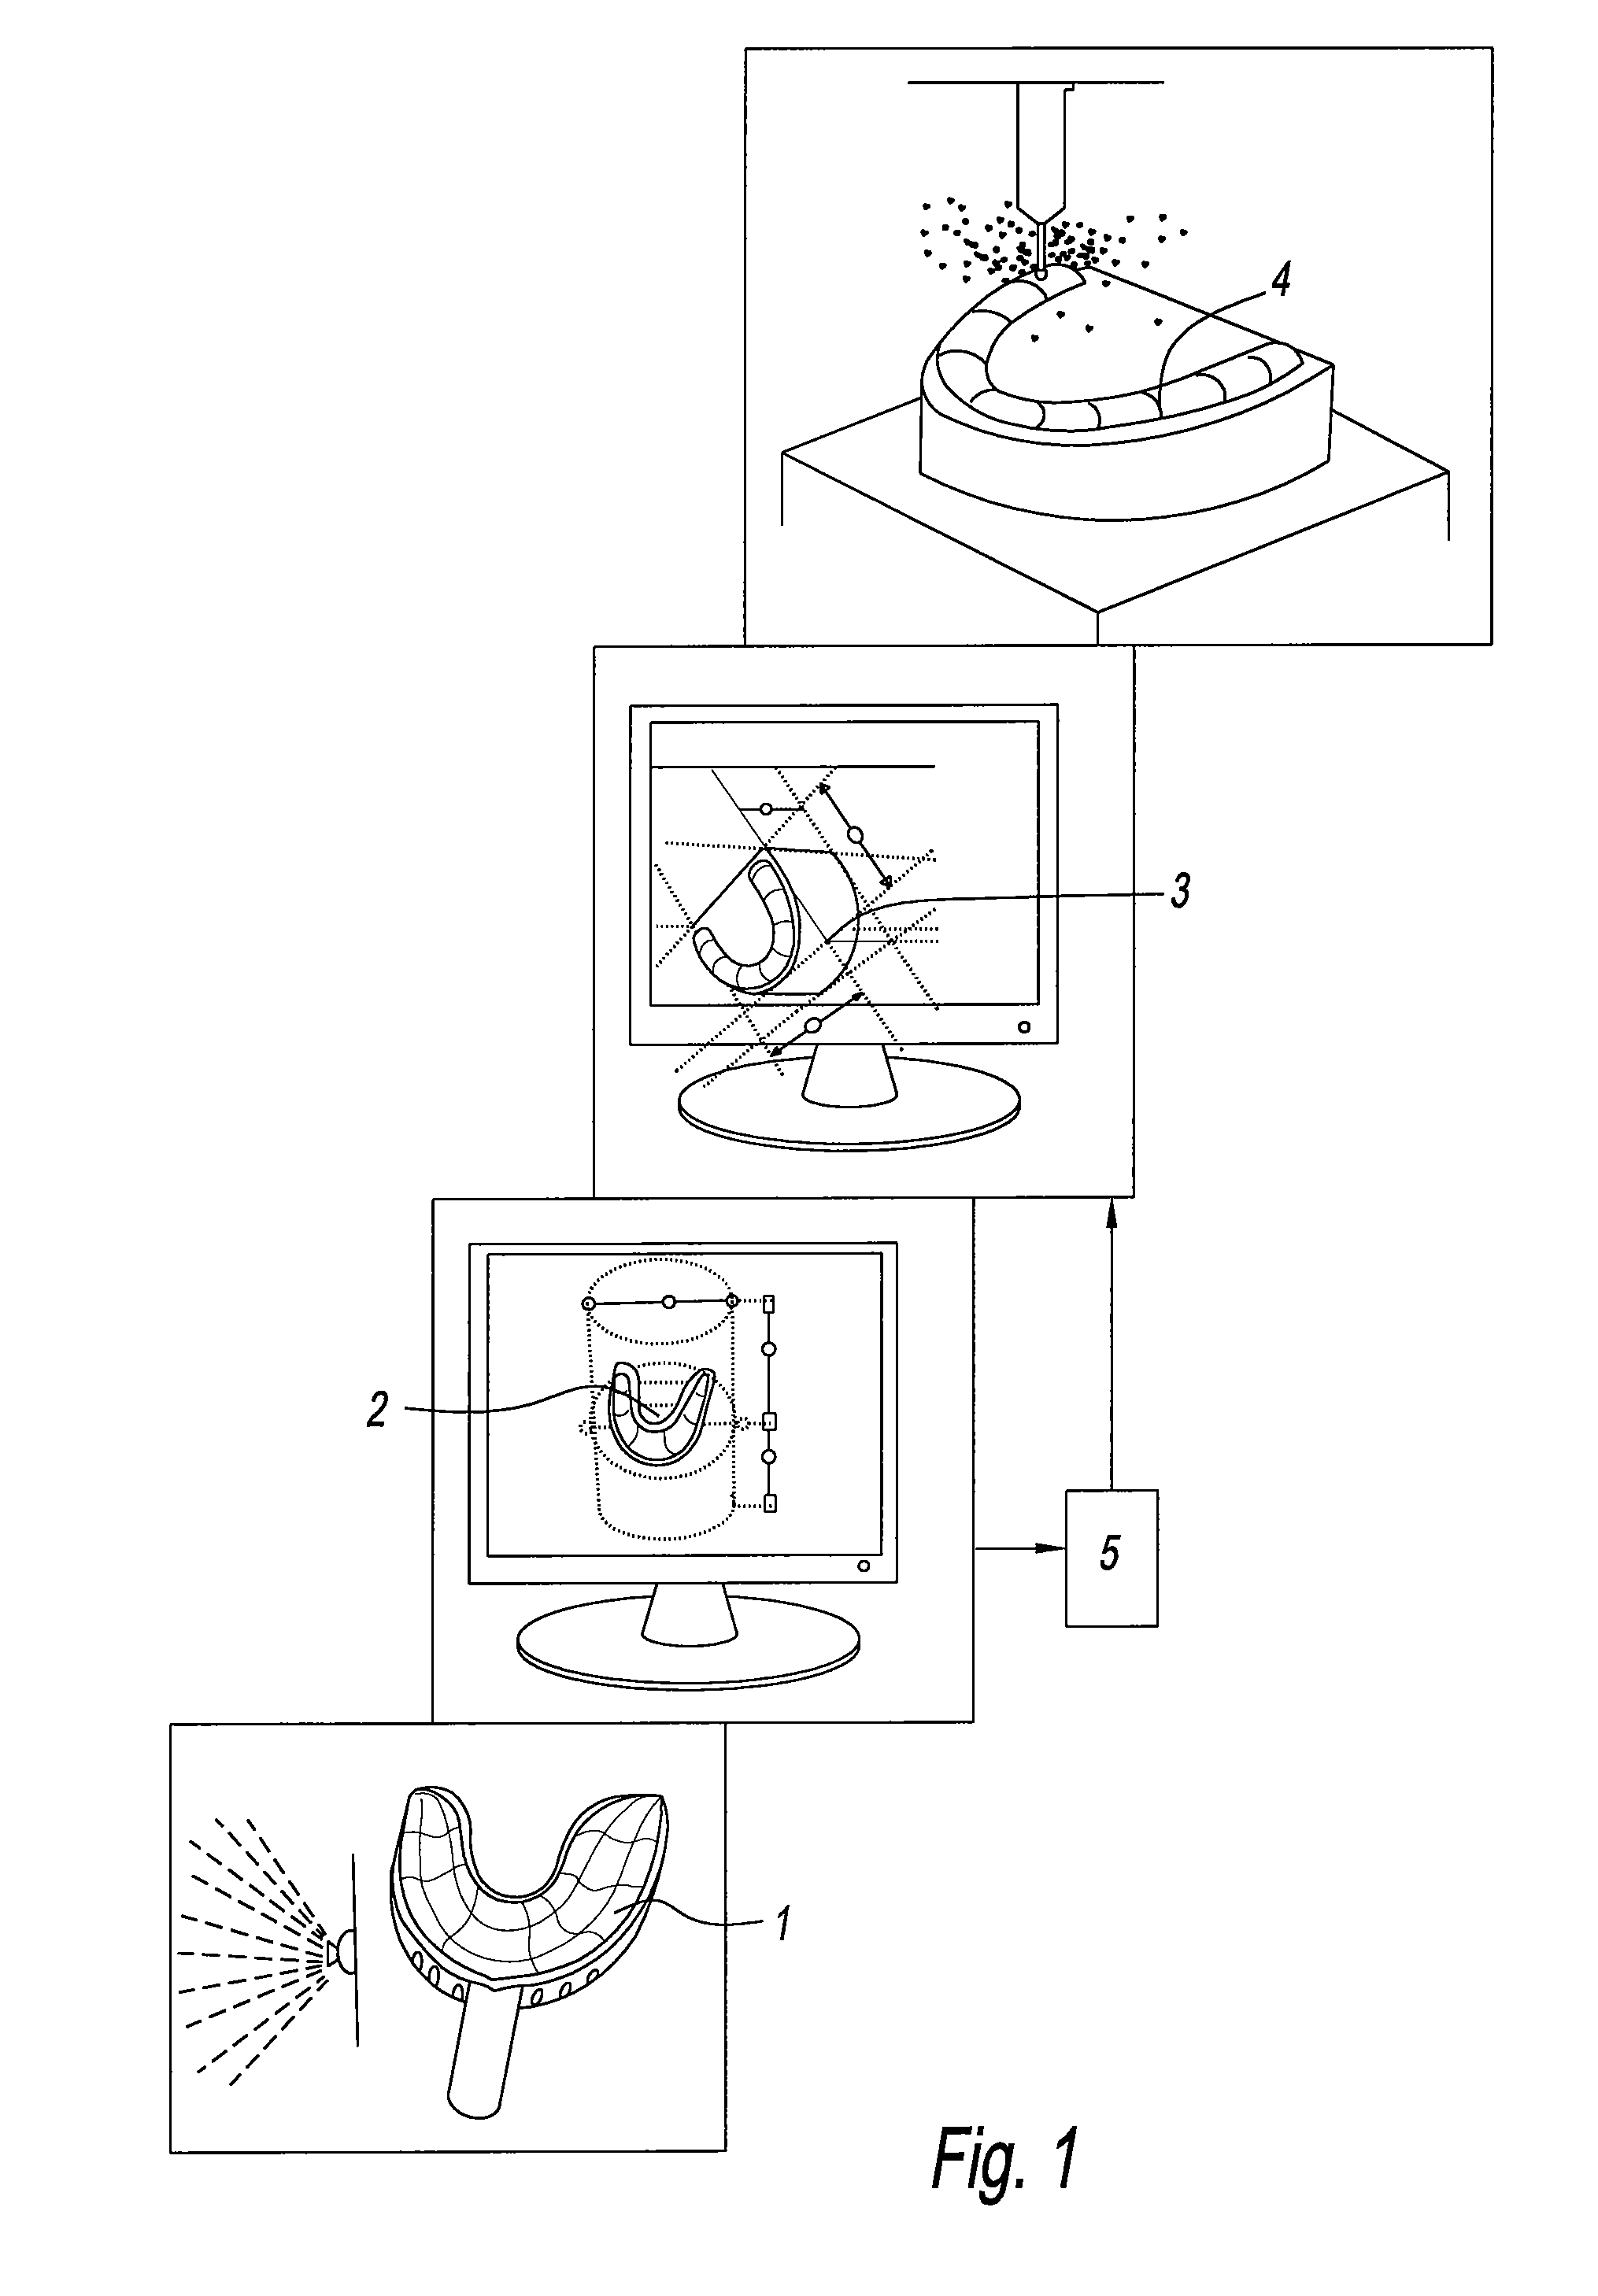 Methods and Apparatus for Producing Dental Stones Base Plates Used in Making Dentures